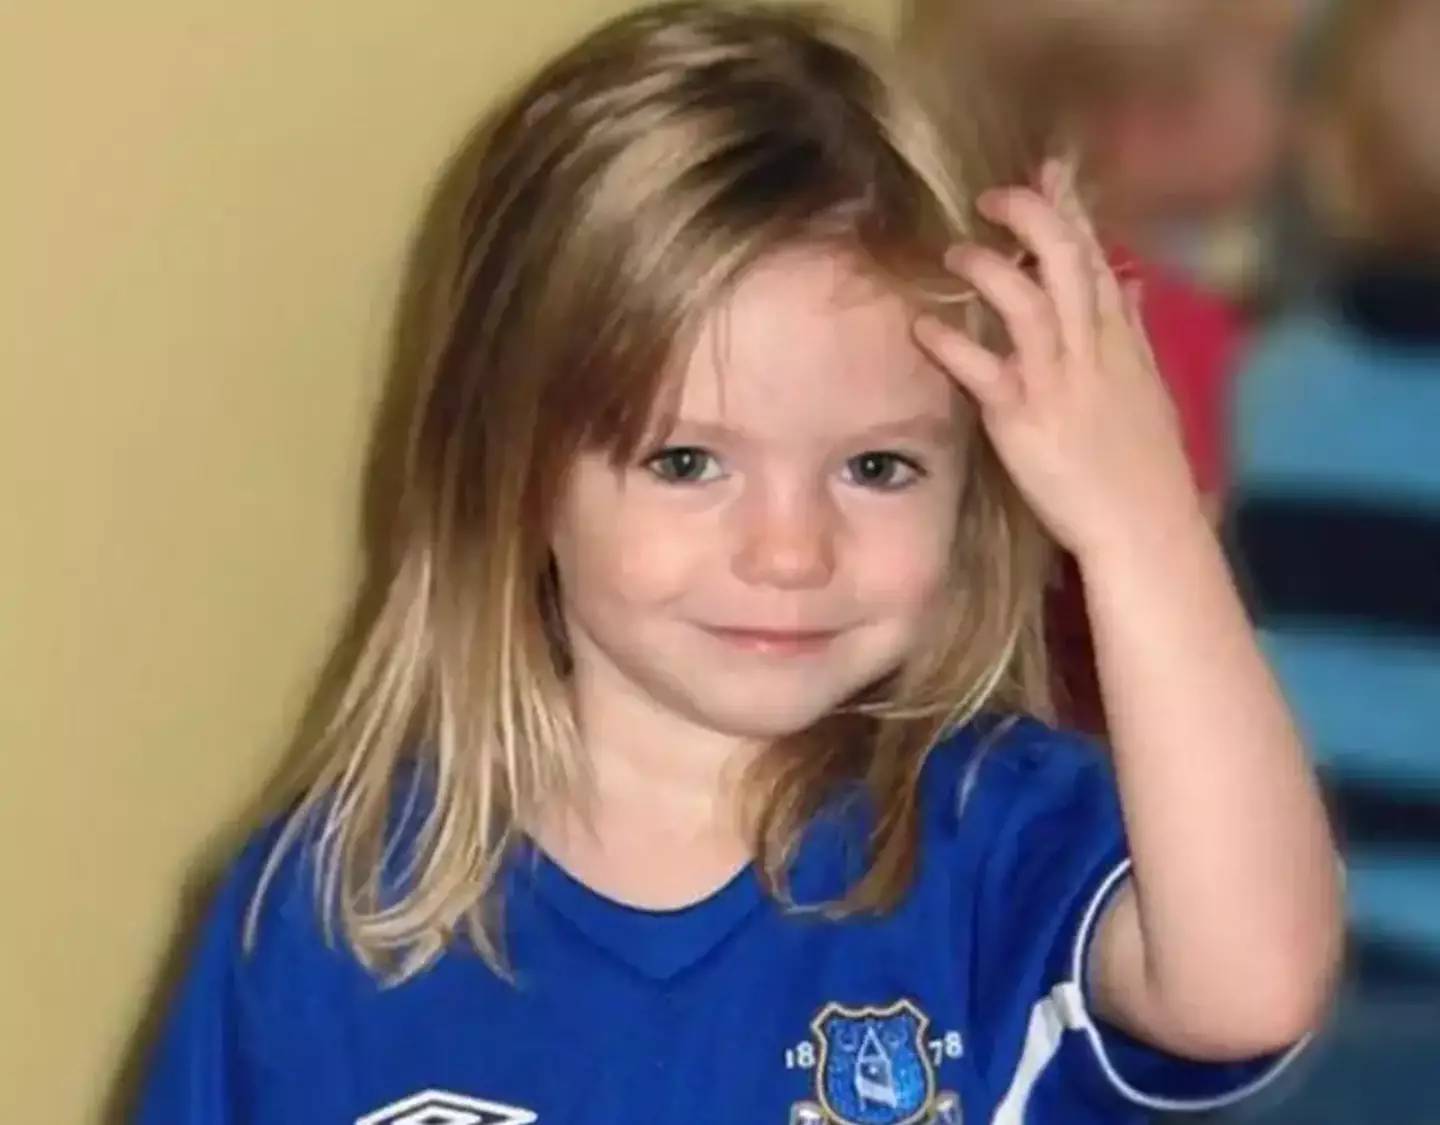 Madeline McCann went missing in Portugal back in 2007,  just days before her fourth birthday.